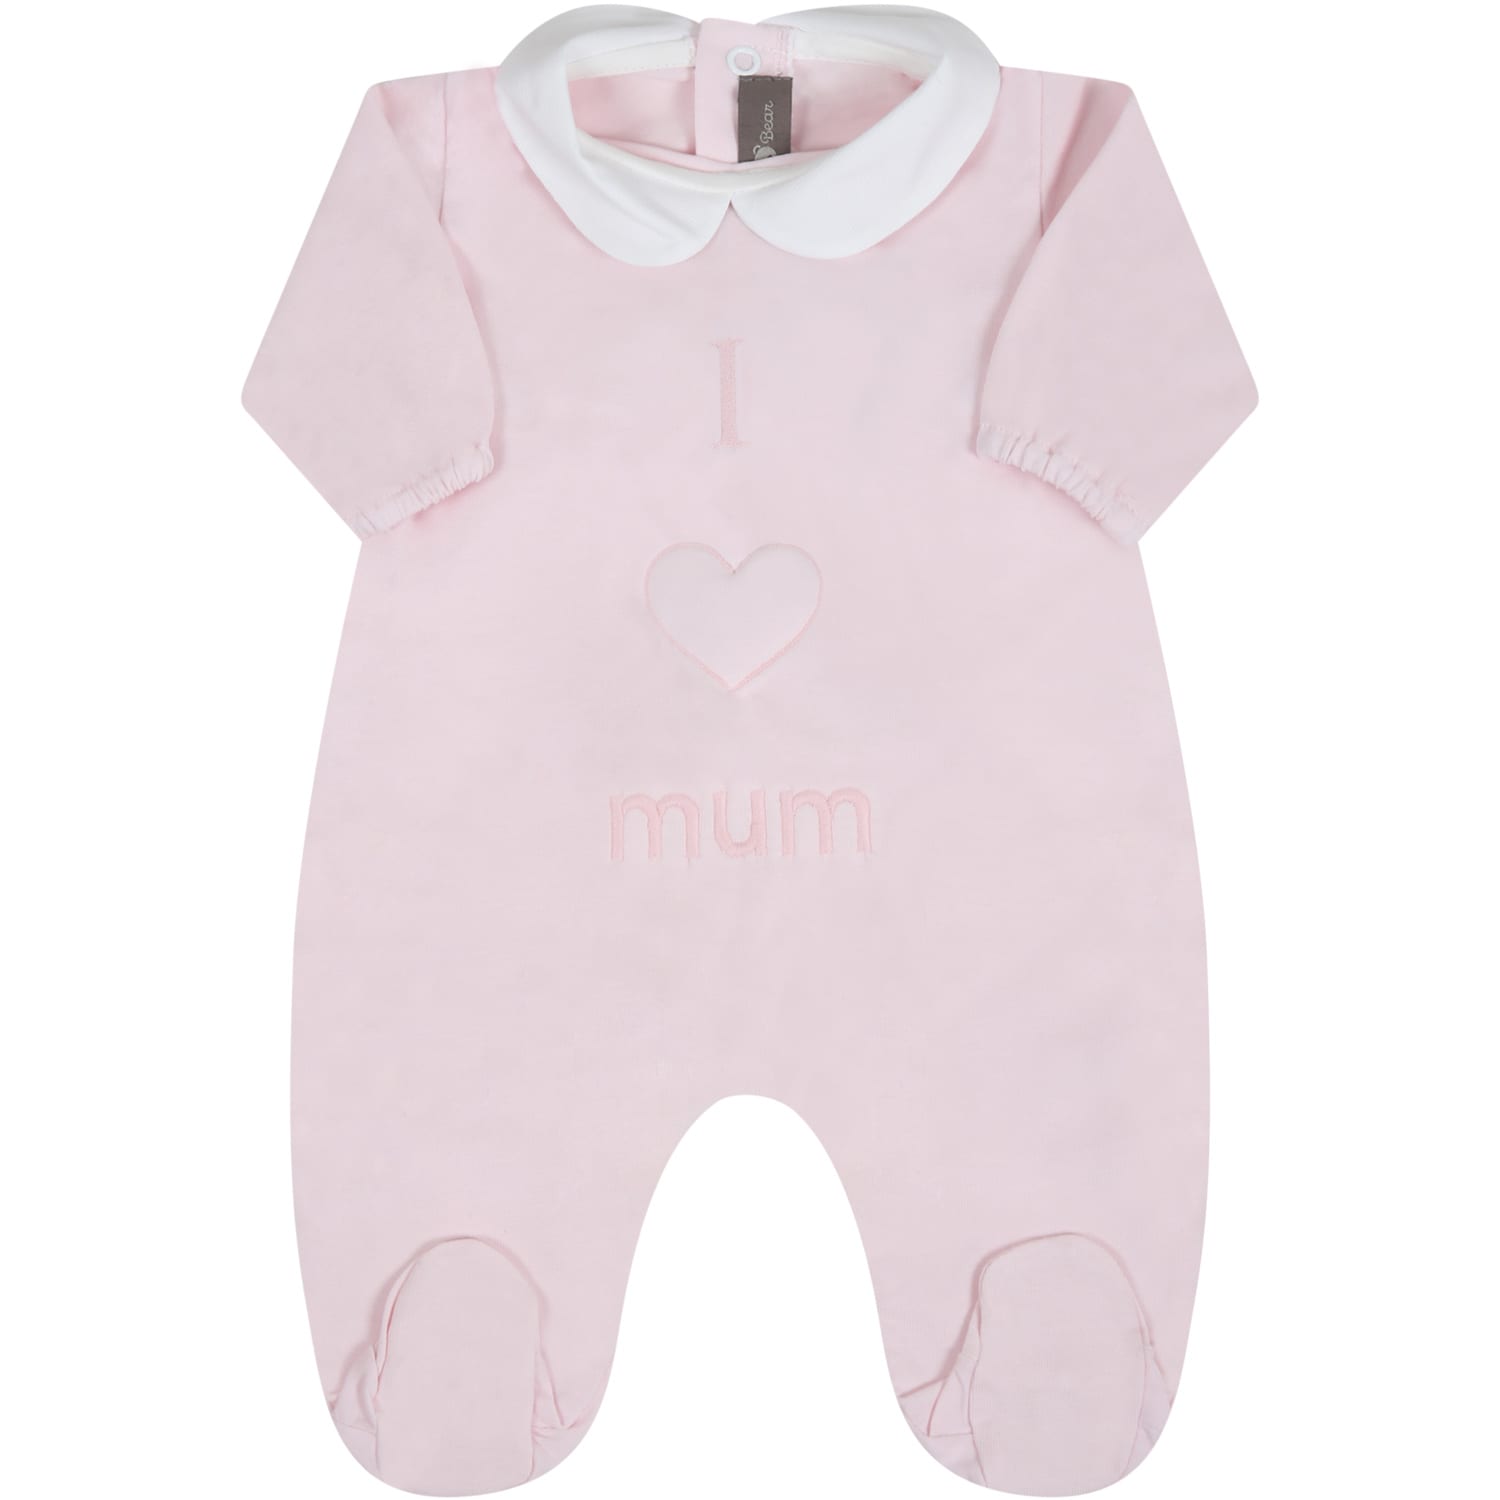 Little Bear Pink Babygrow For Babygirl With Writing